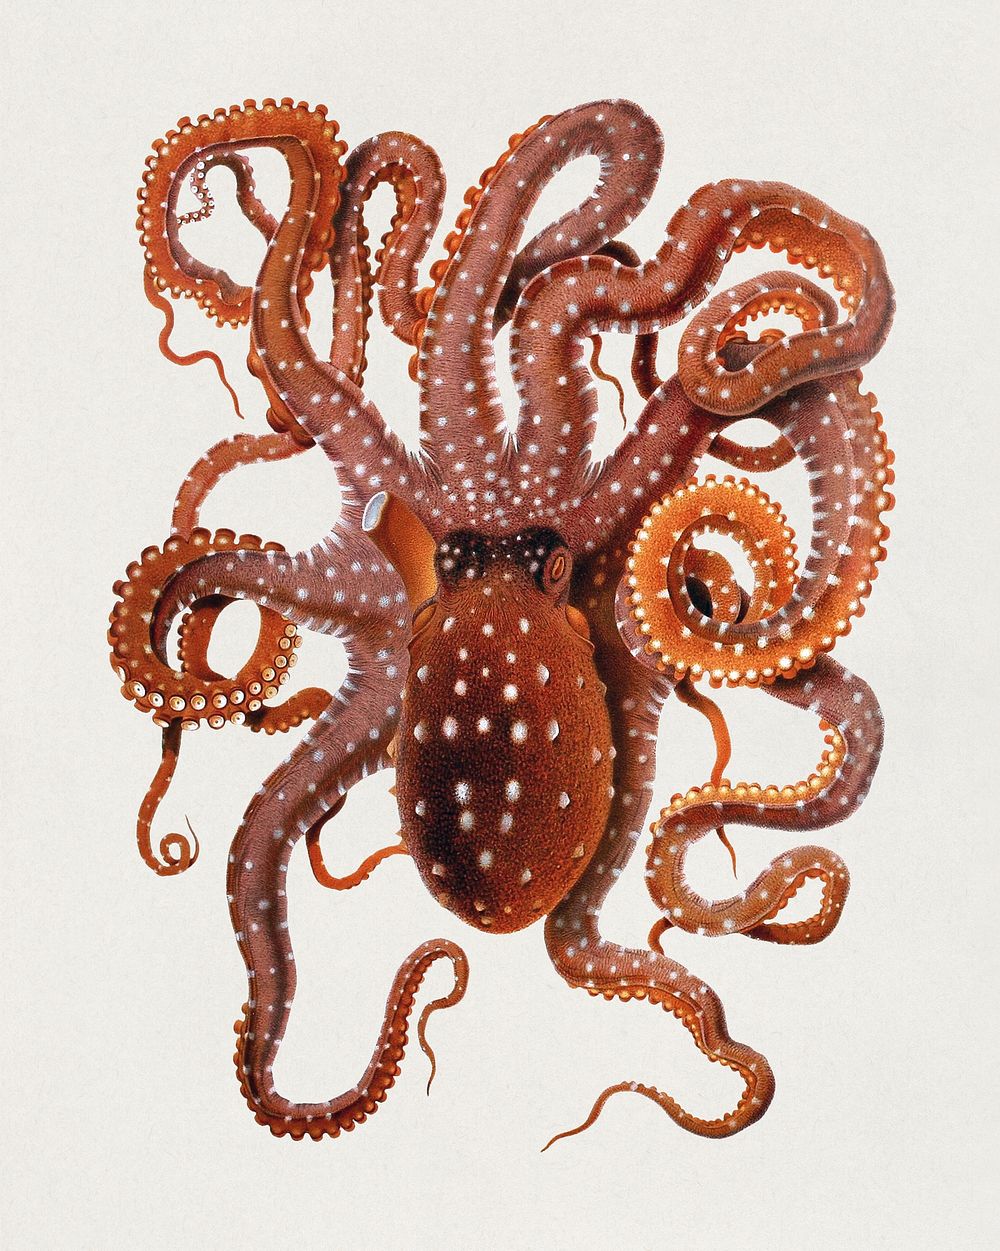 Callistoctopus macropus (White-spotted Octopus) from the Mediterranean Sea (1896). Original public domain image from Digital…